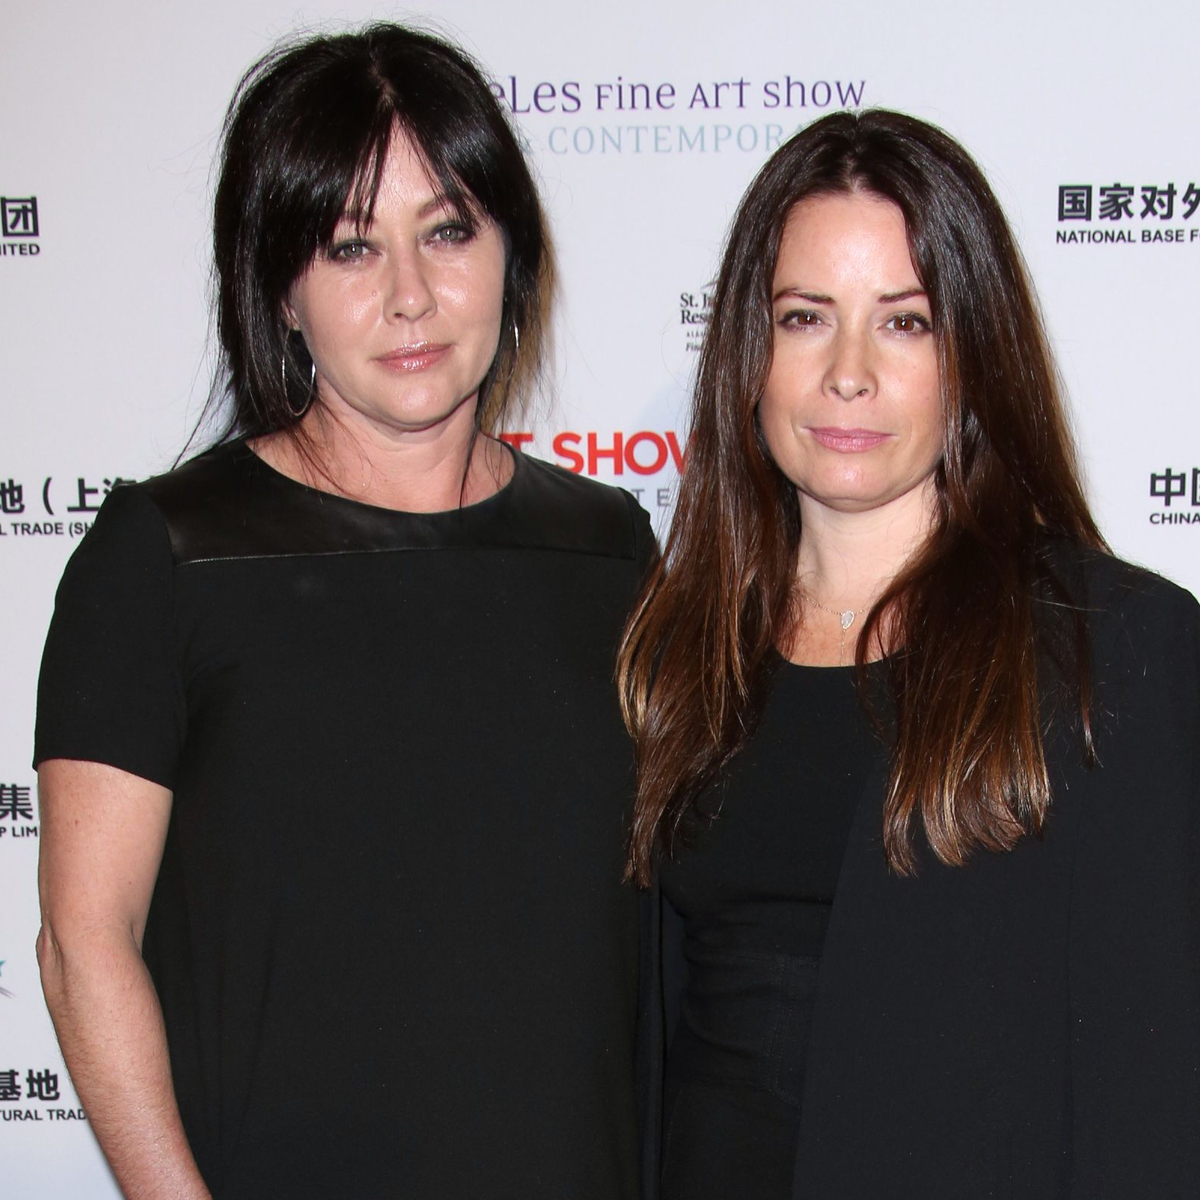 Charmed’s Holly Marie Combs Honors Late “Fighter” Shannen Doherty